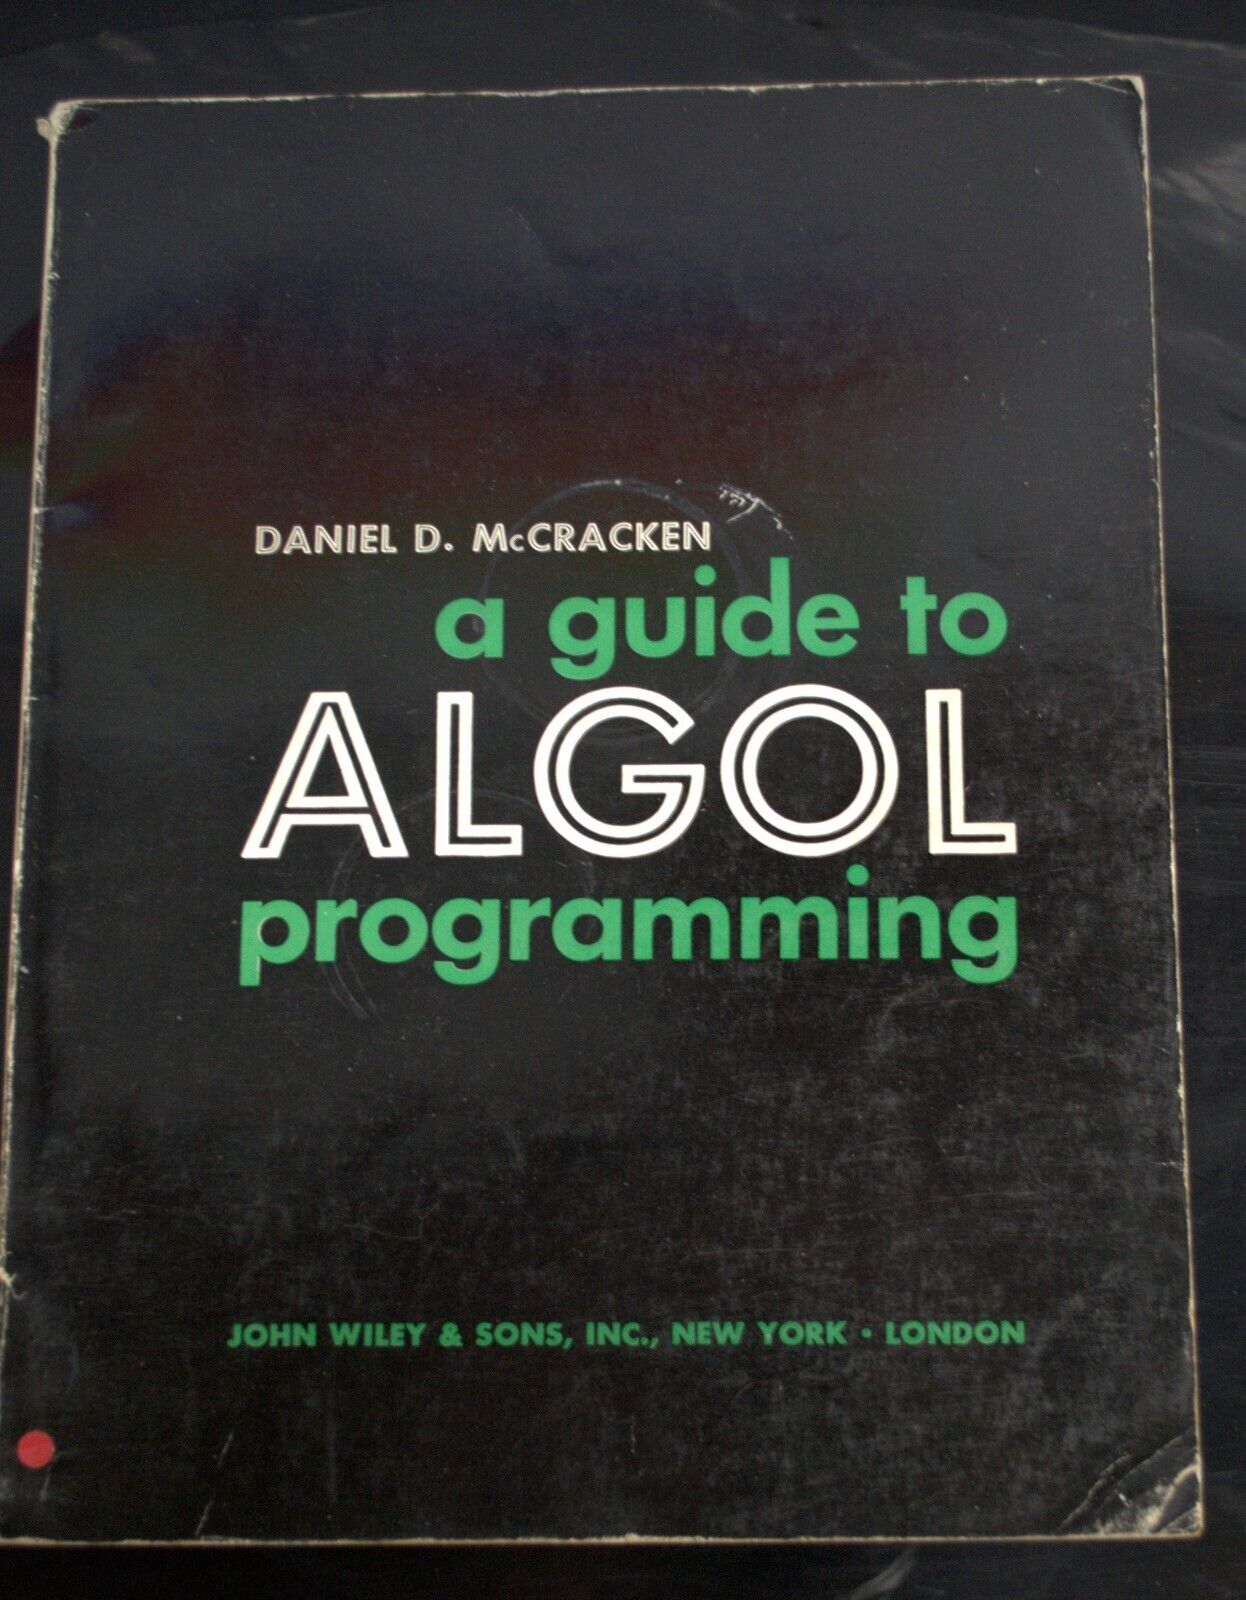 A Guide to ALGOL Programming